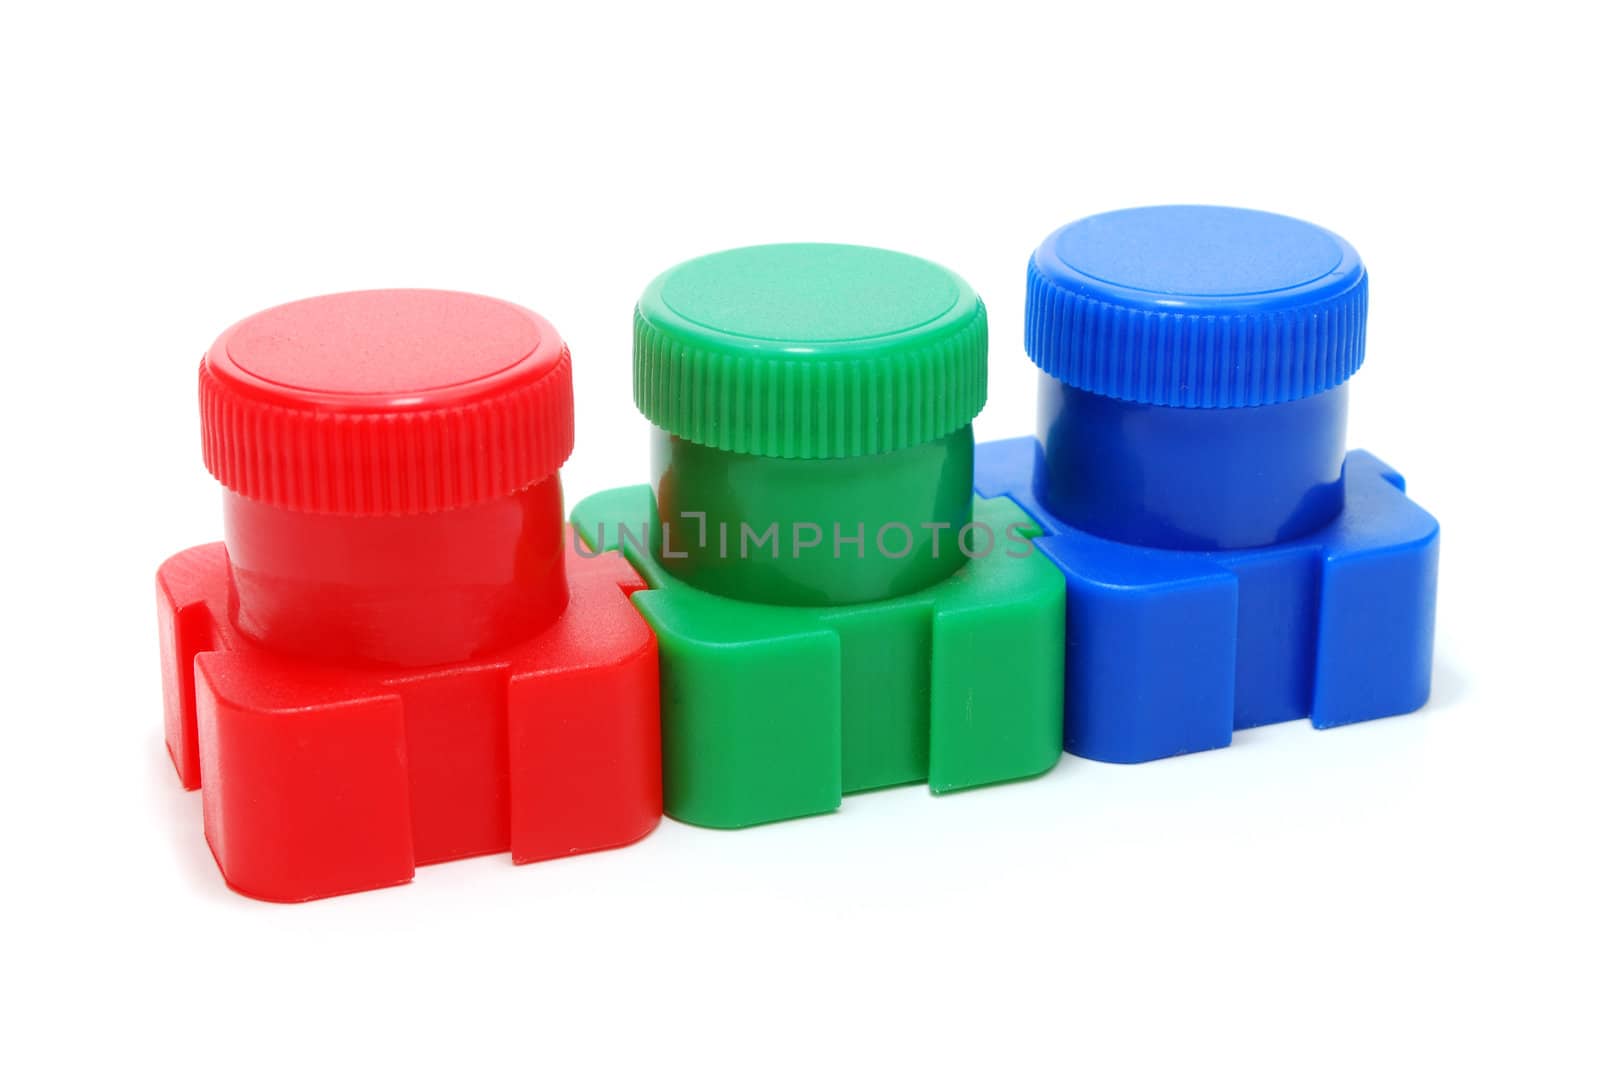 Three Ink (Paint) Cans of Red, Green and Blue Color (RGB Concept) Isolated on White